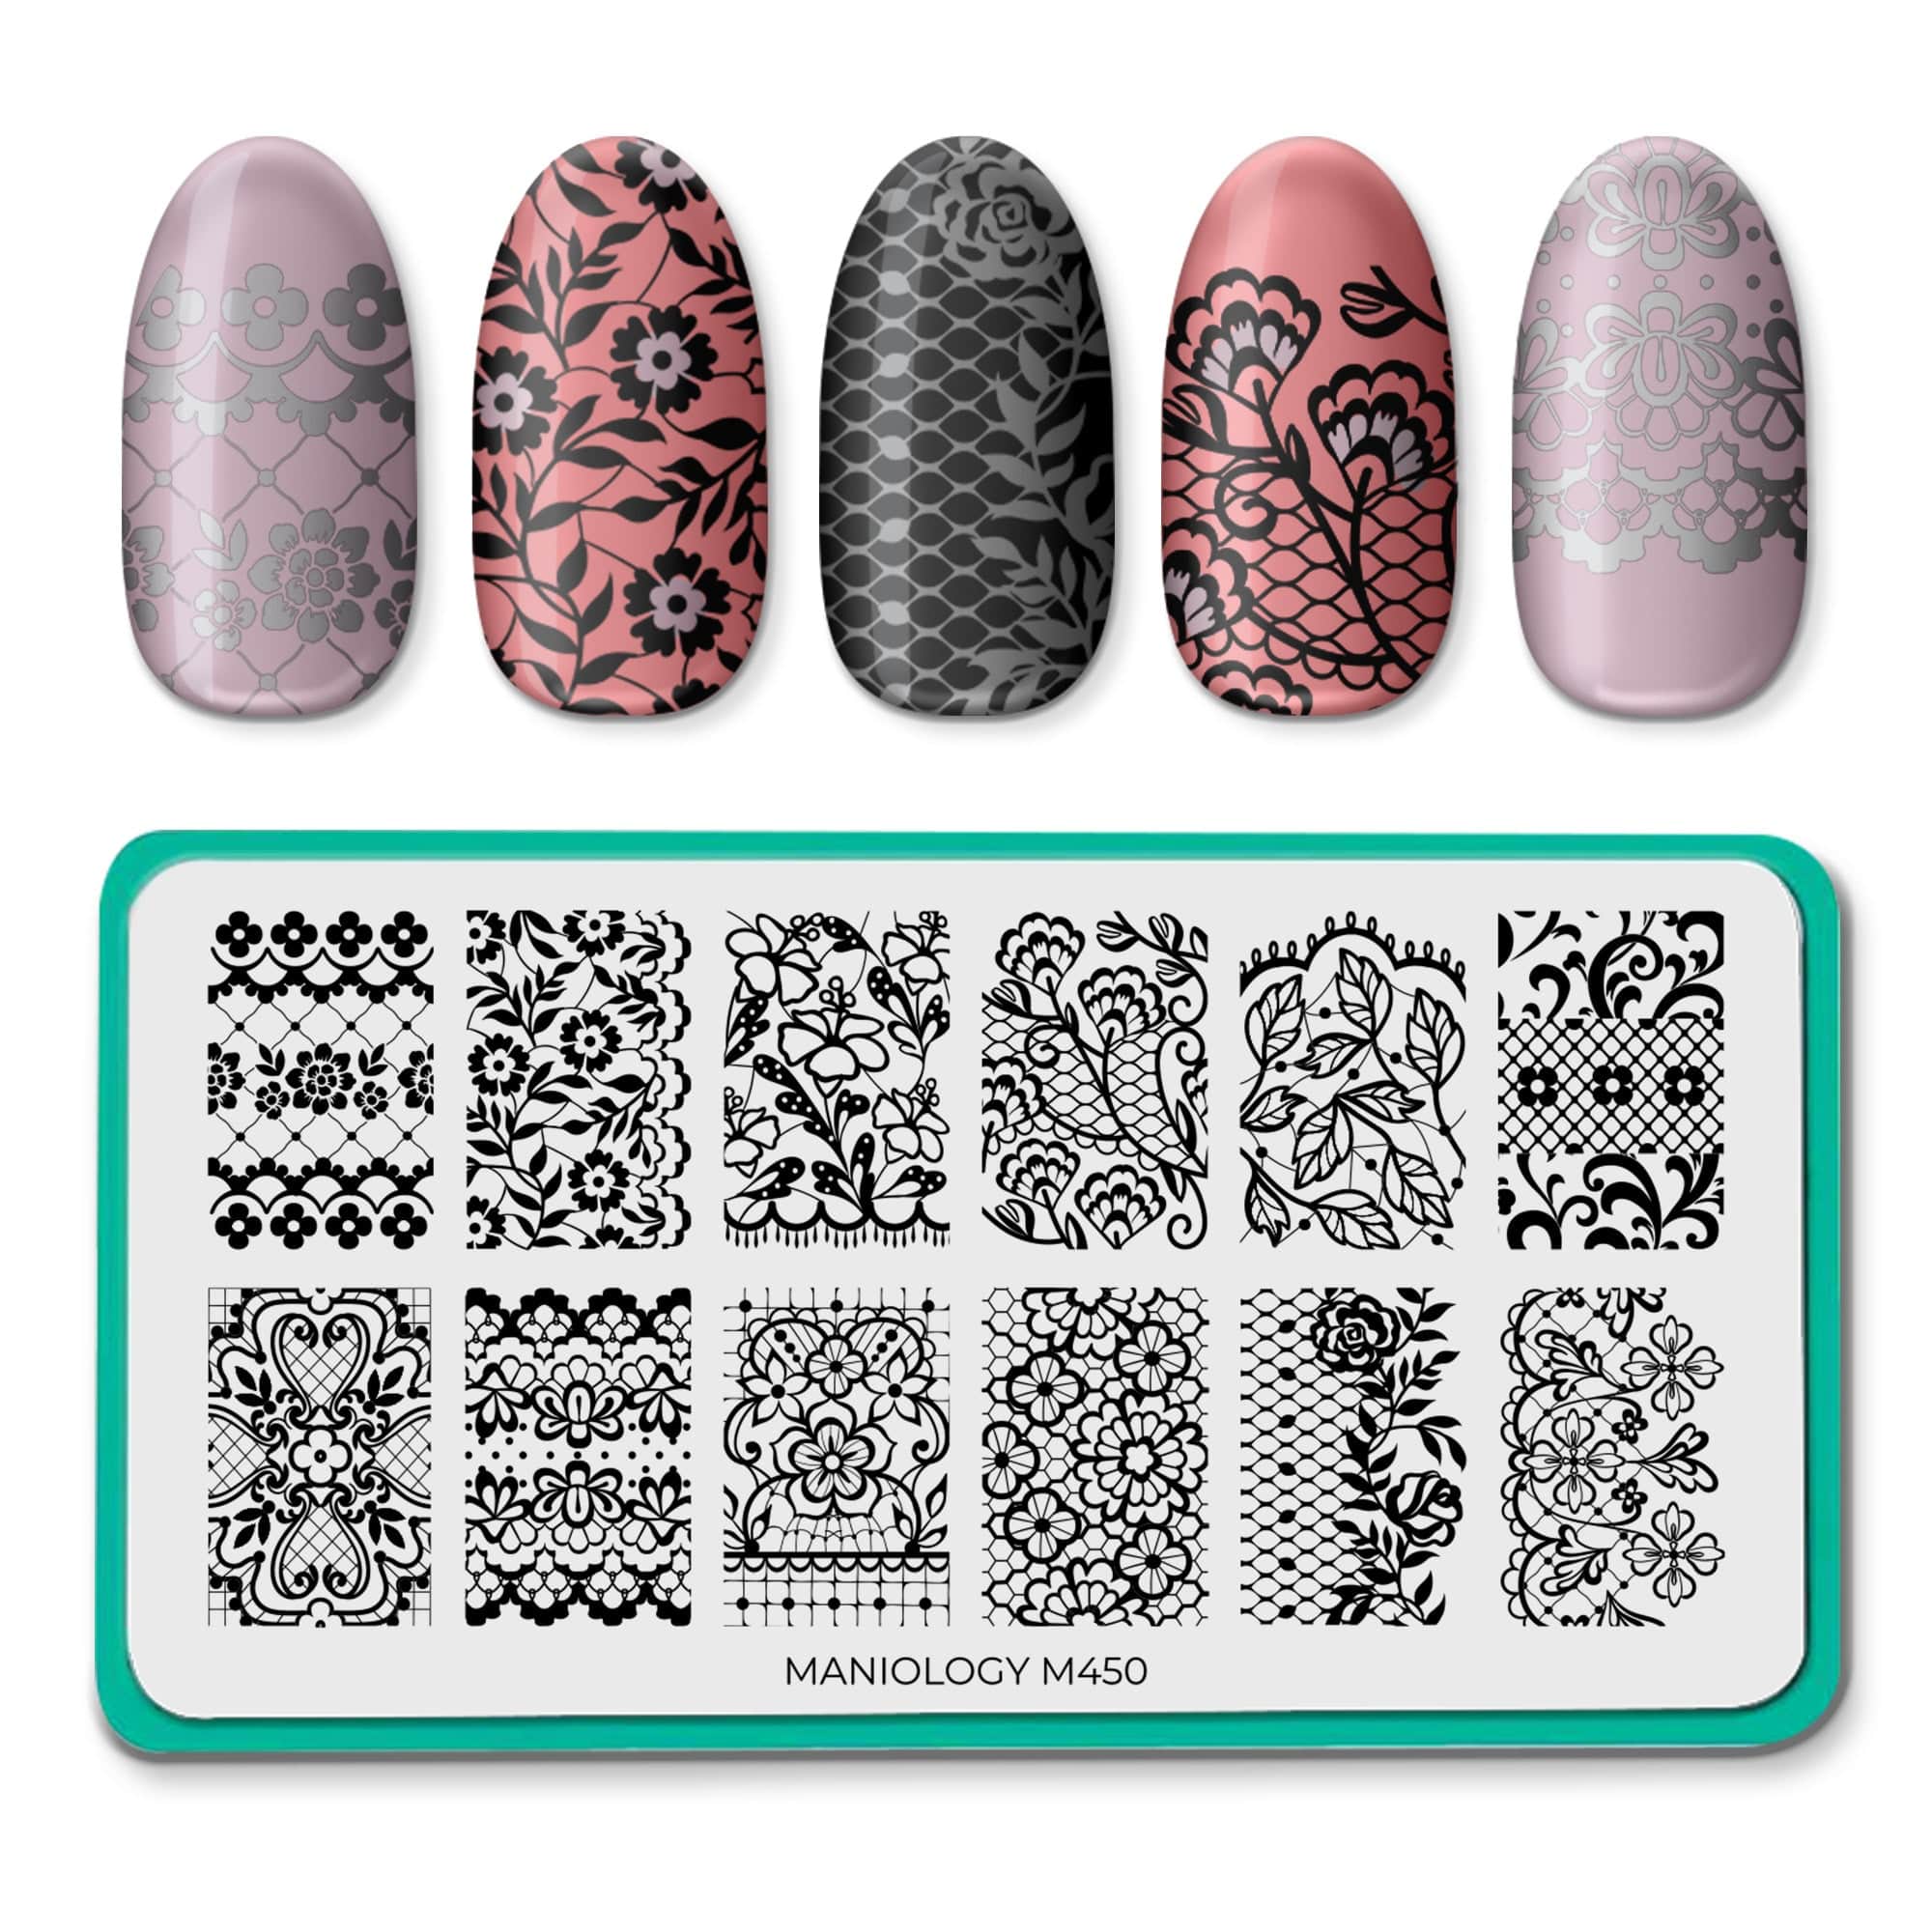  Maniology (Formerly BMC) Roll Up Silicone Nail Art Decal Maker  Manicure Workspace Sheet - Lotus Mat : Beauty & Personal Care